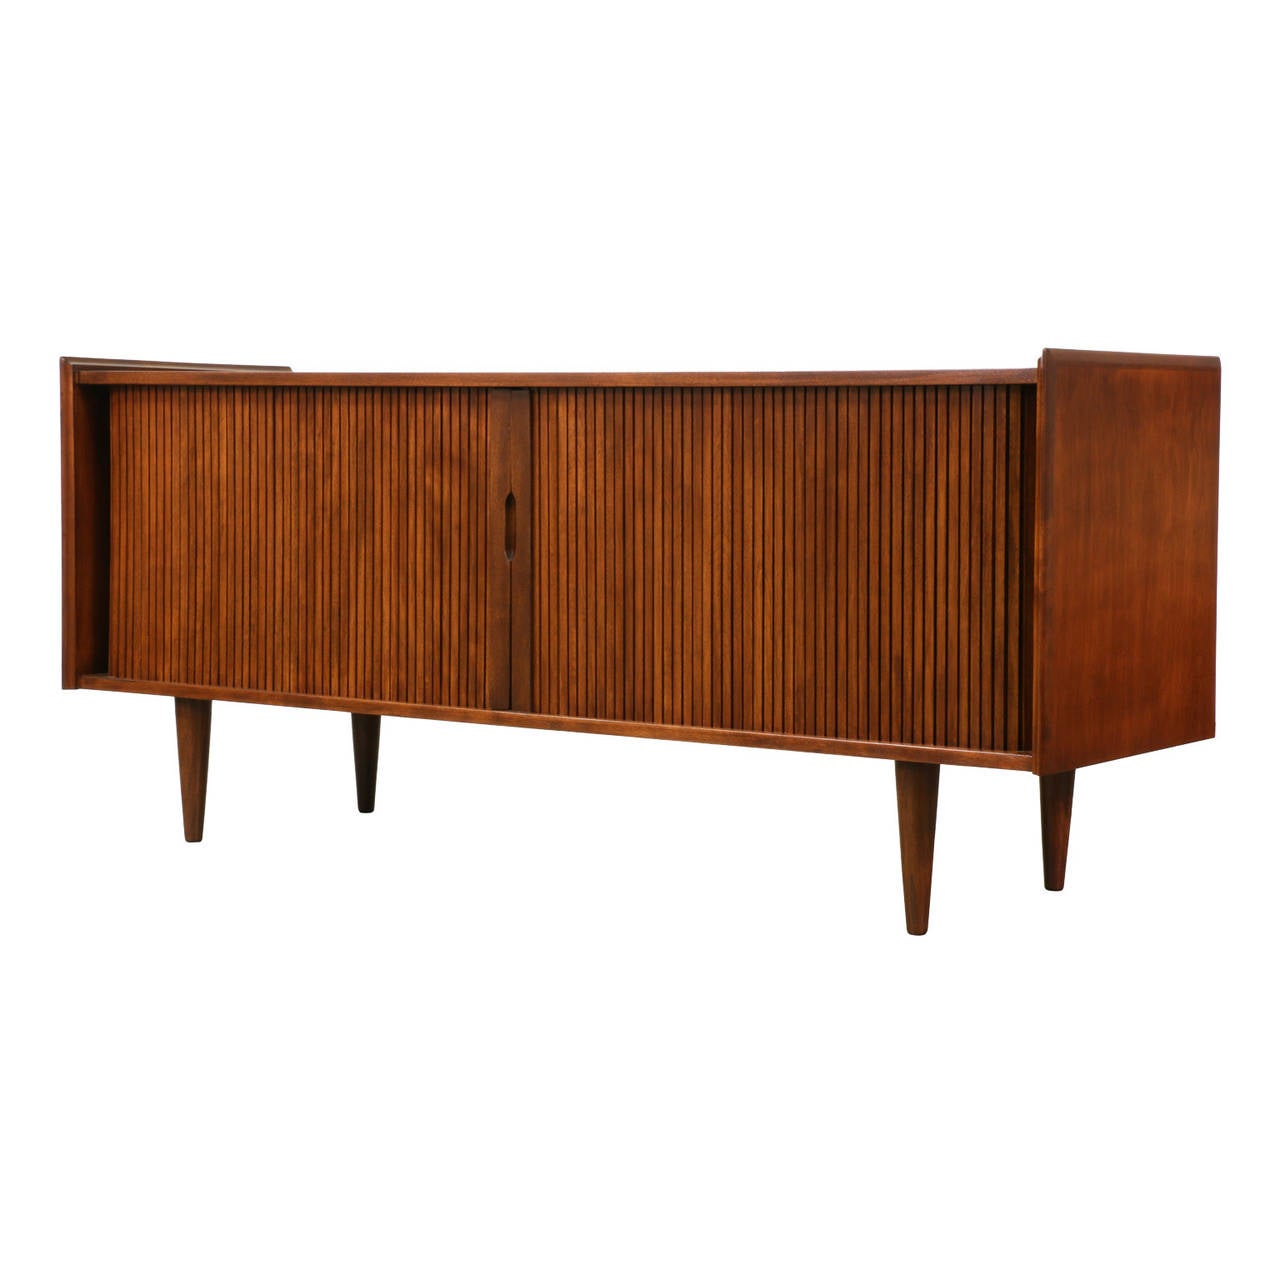 Designer: Dillingham
Manufacturer: Dillingham
Period/Style: Mid Century Modern
Country: United States
Date: 1960’s

Dimensions: 25.5″H x 60″L x 18.25″W
Materials: Walnut
Condition: Excellent – Newly Refinished
Number of Items: 1
ID Number: